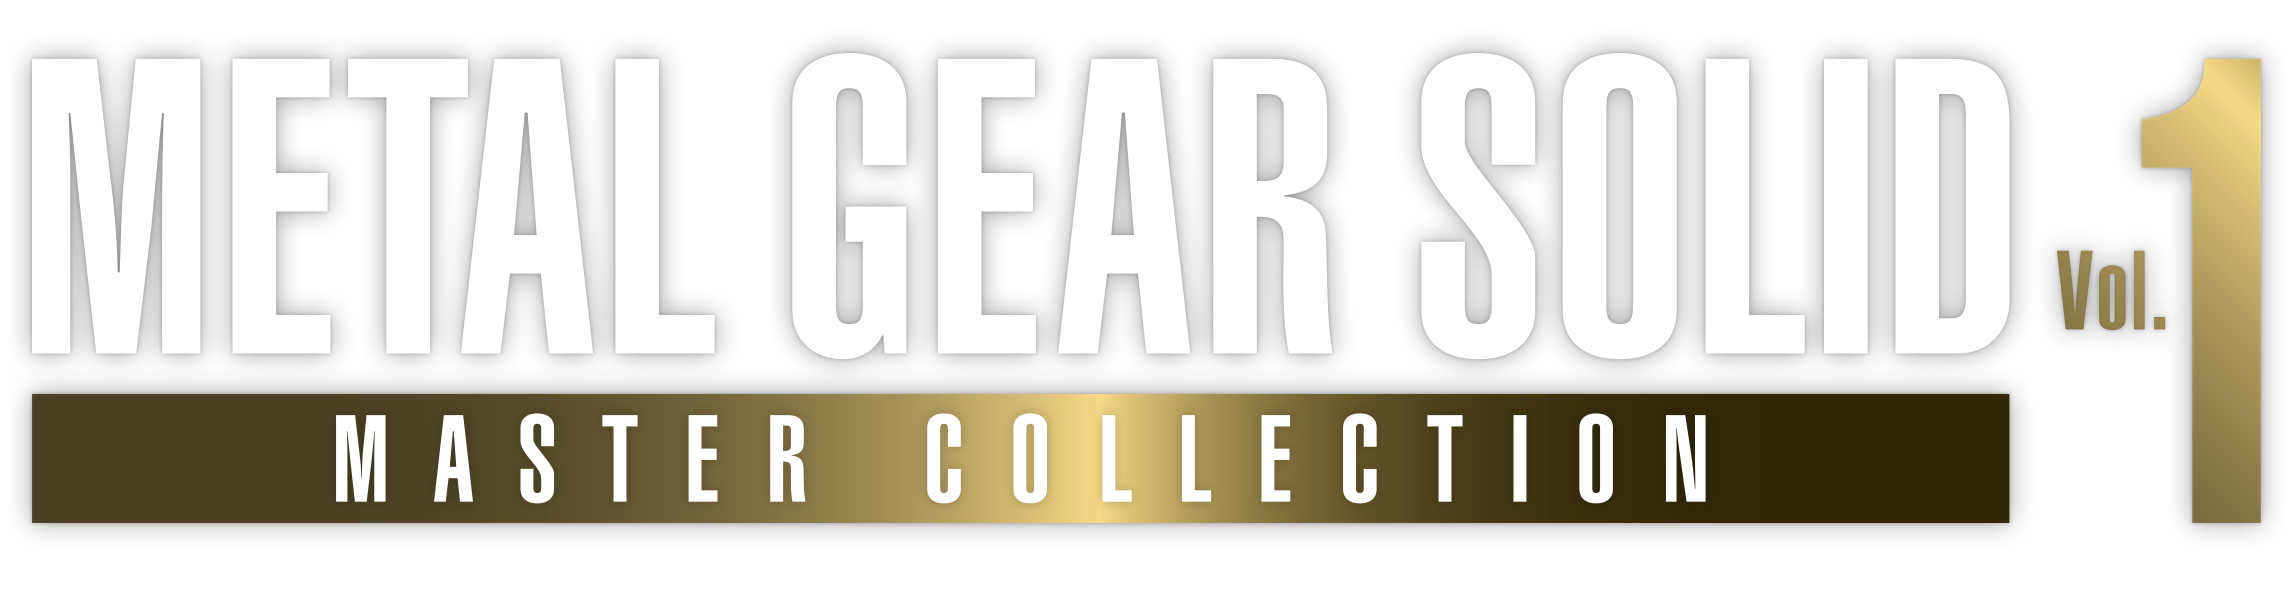 METAL & MASTER SOLID: Vol.1 GEAR COLLECTION PS4 PS5